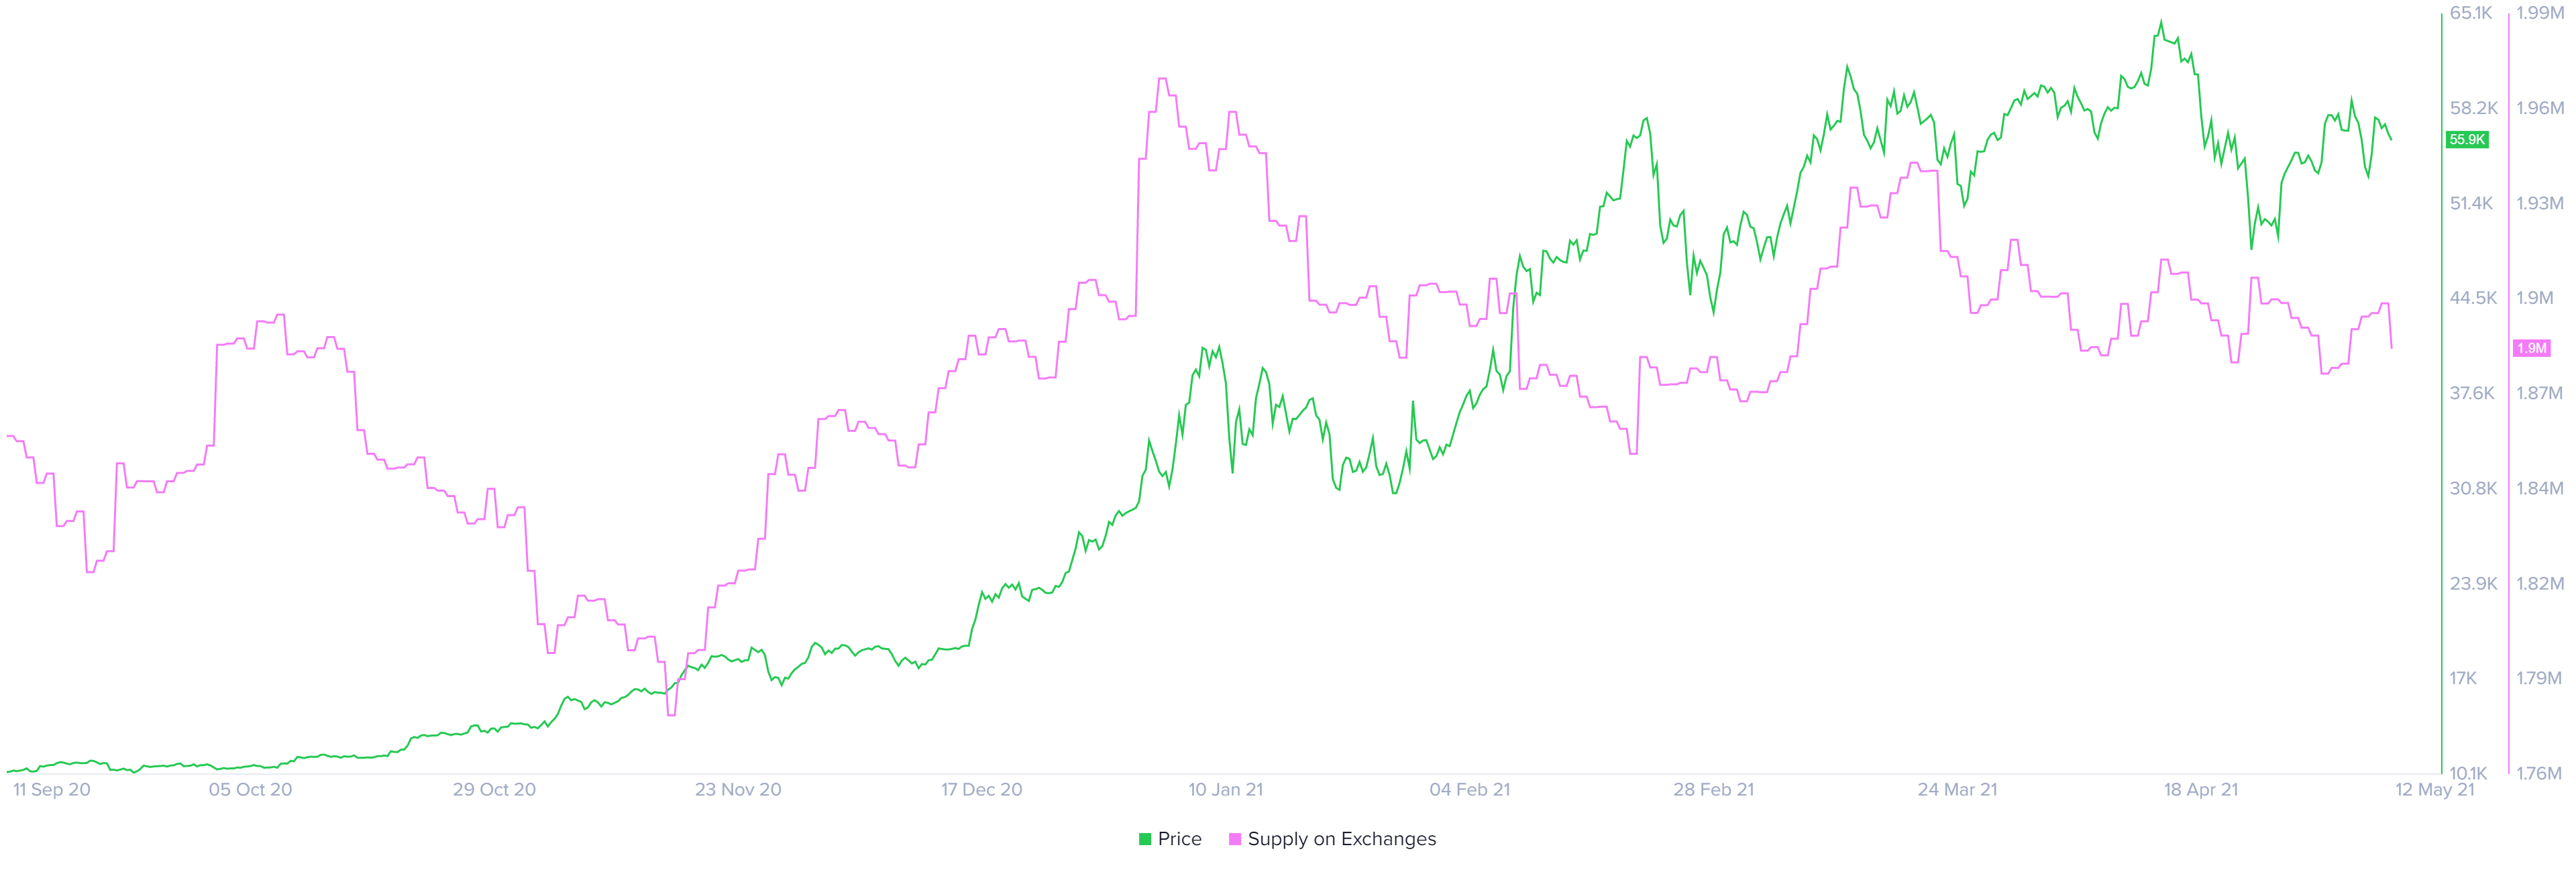 BTC supply on exchanges chart